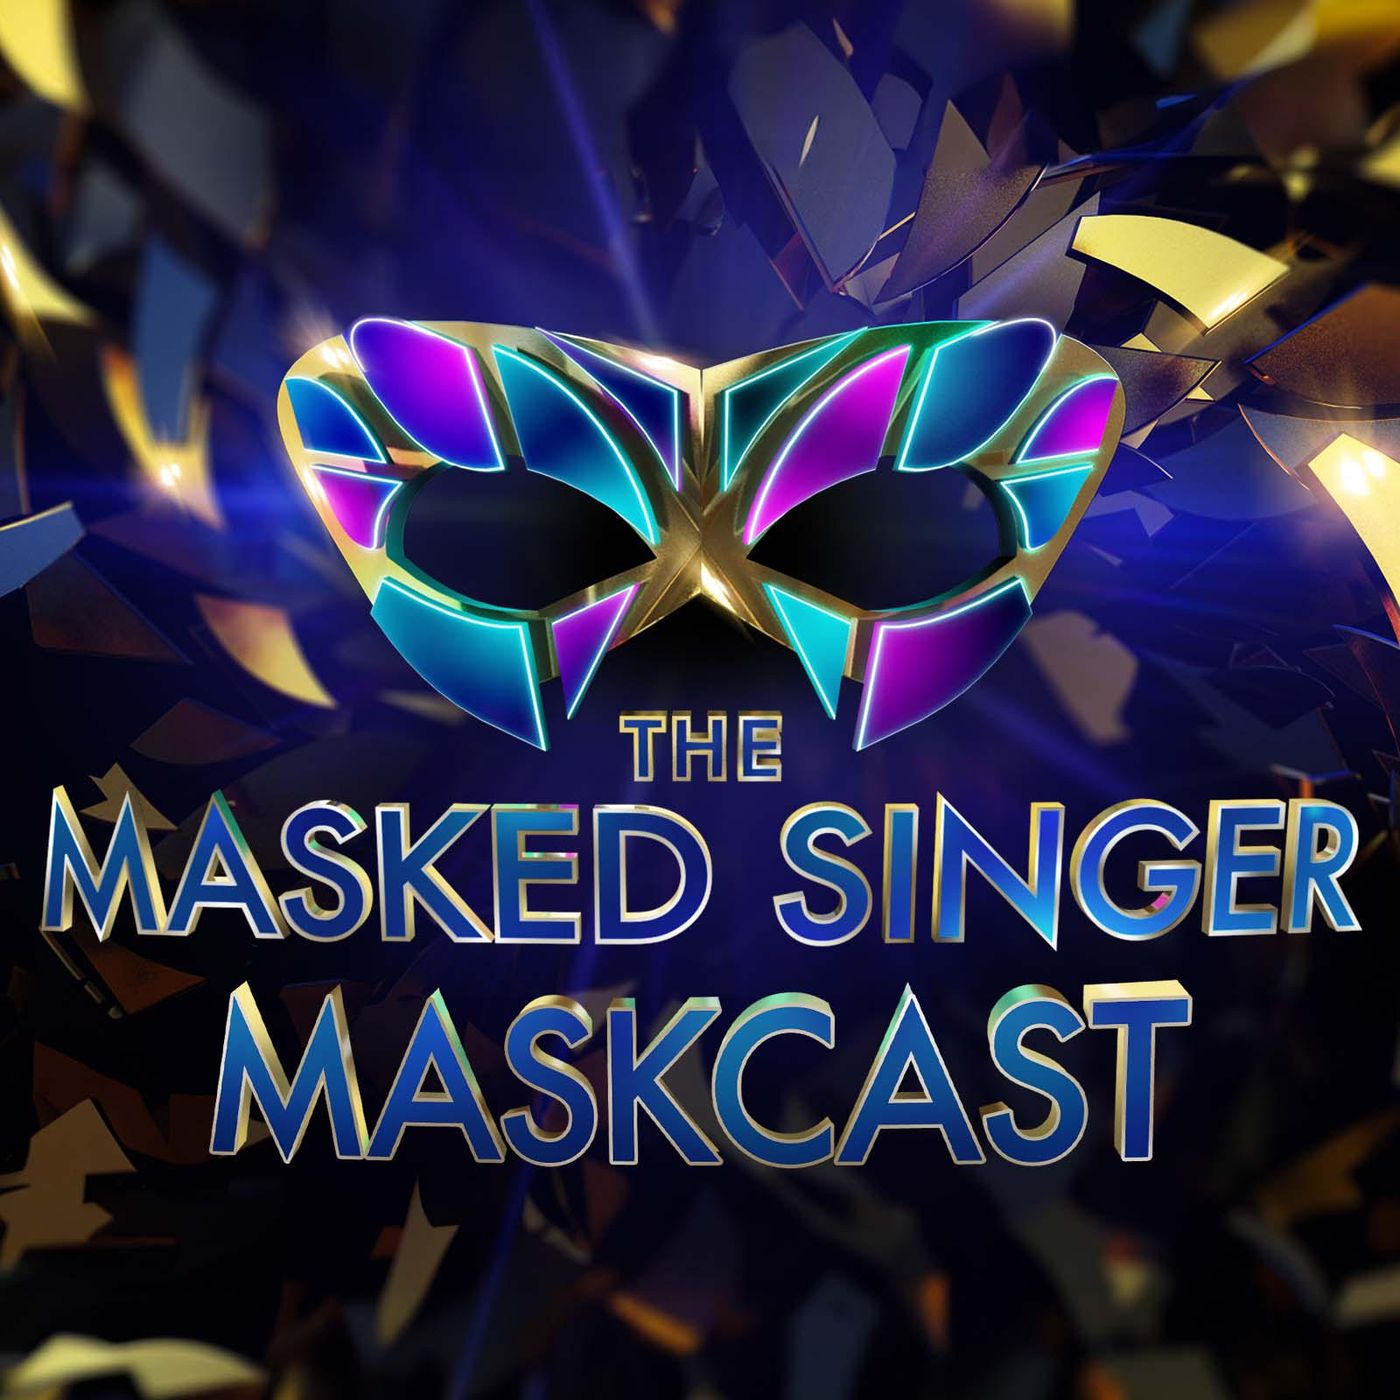 MASKCAST, Episode One with Busted's Charlie Simpson